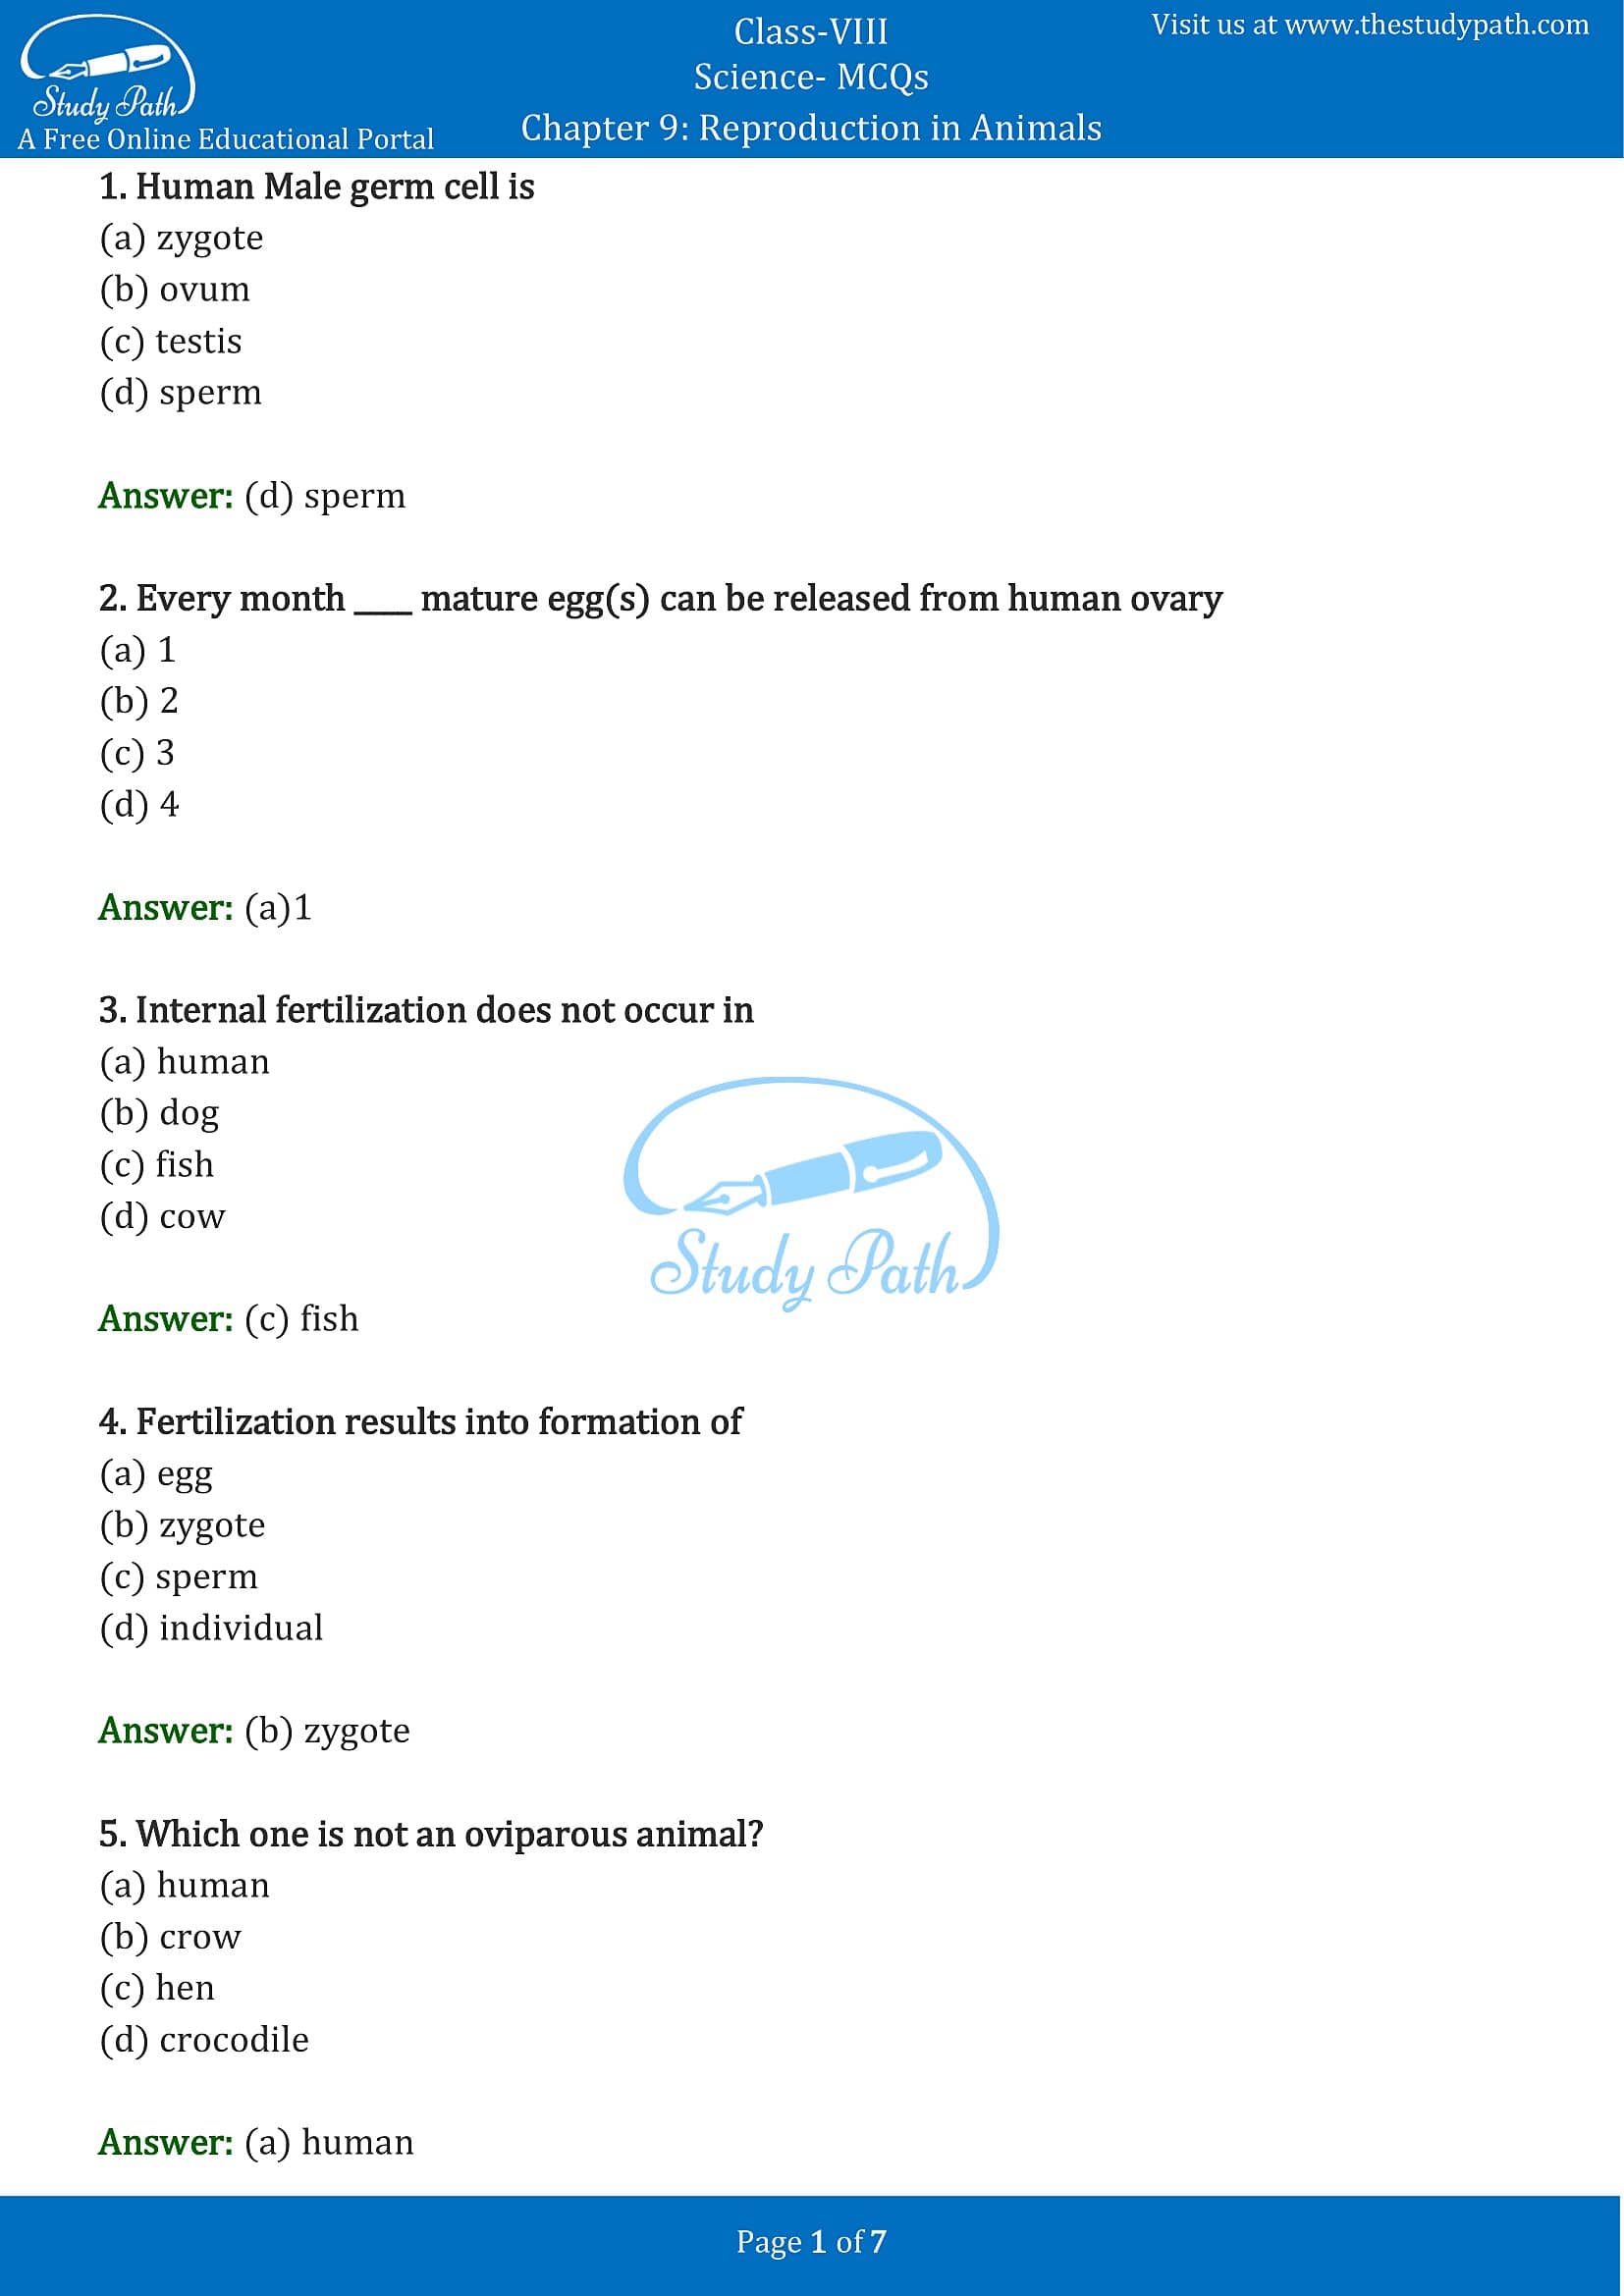 Class 8 Science Chapter 9 Reproduction in Animals MCQ with Answers